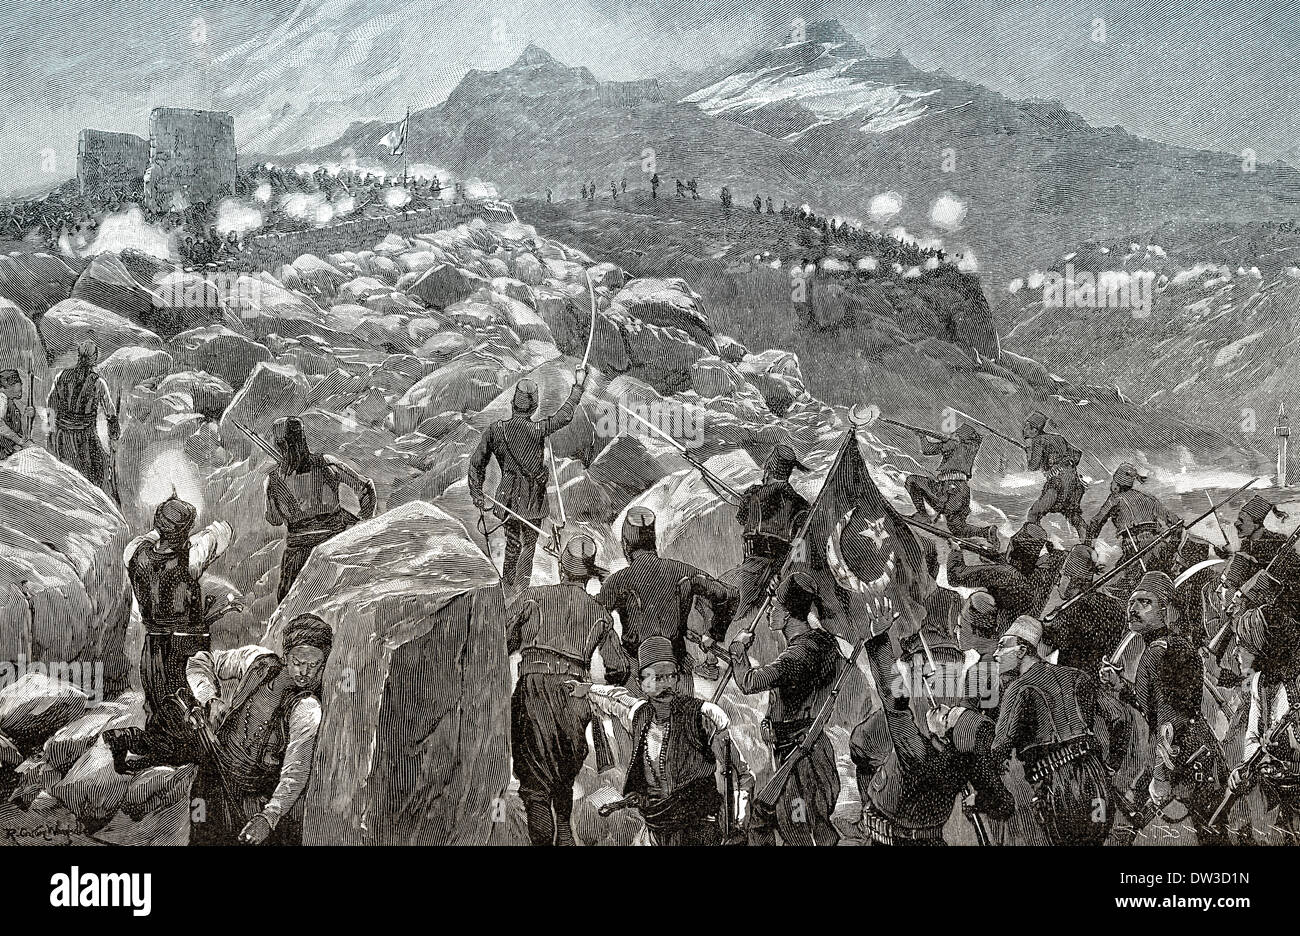 Greco Turkish War Of 1897 High Resolution Stock Photography and Images - Alamy